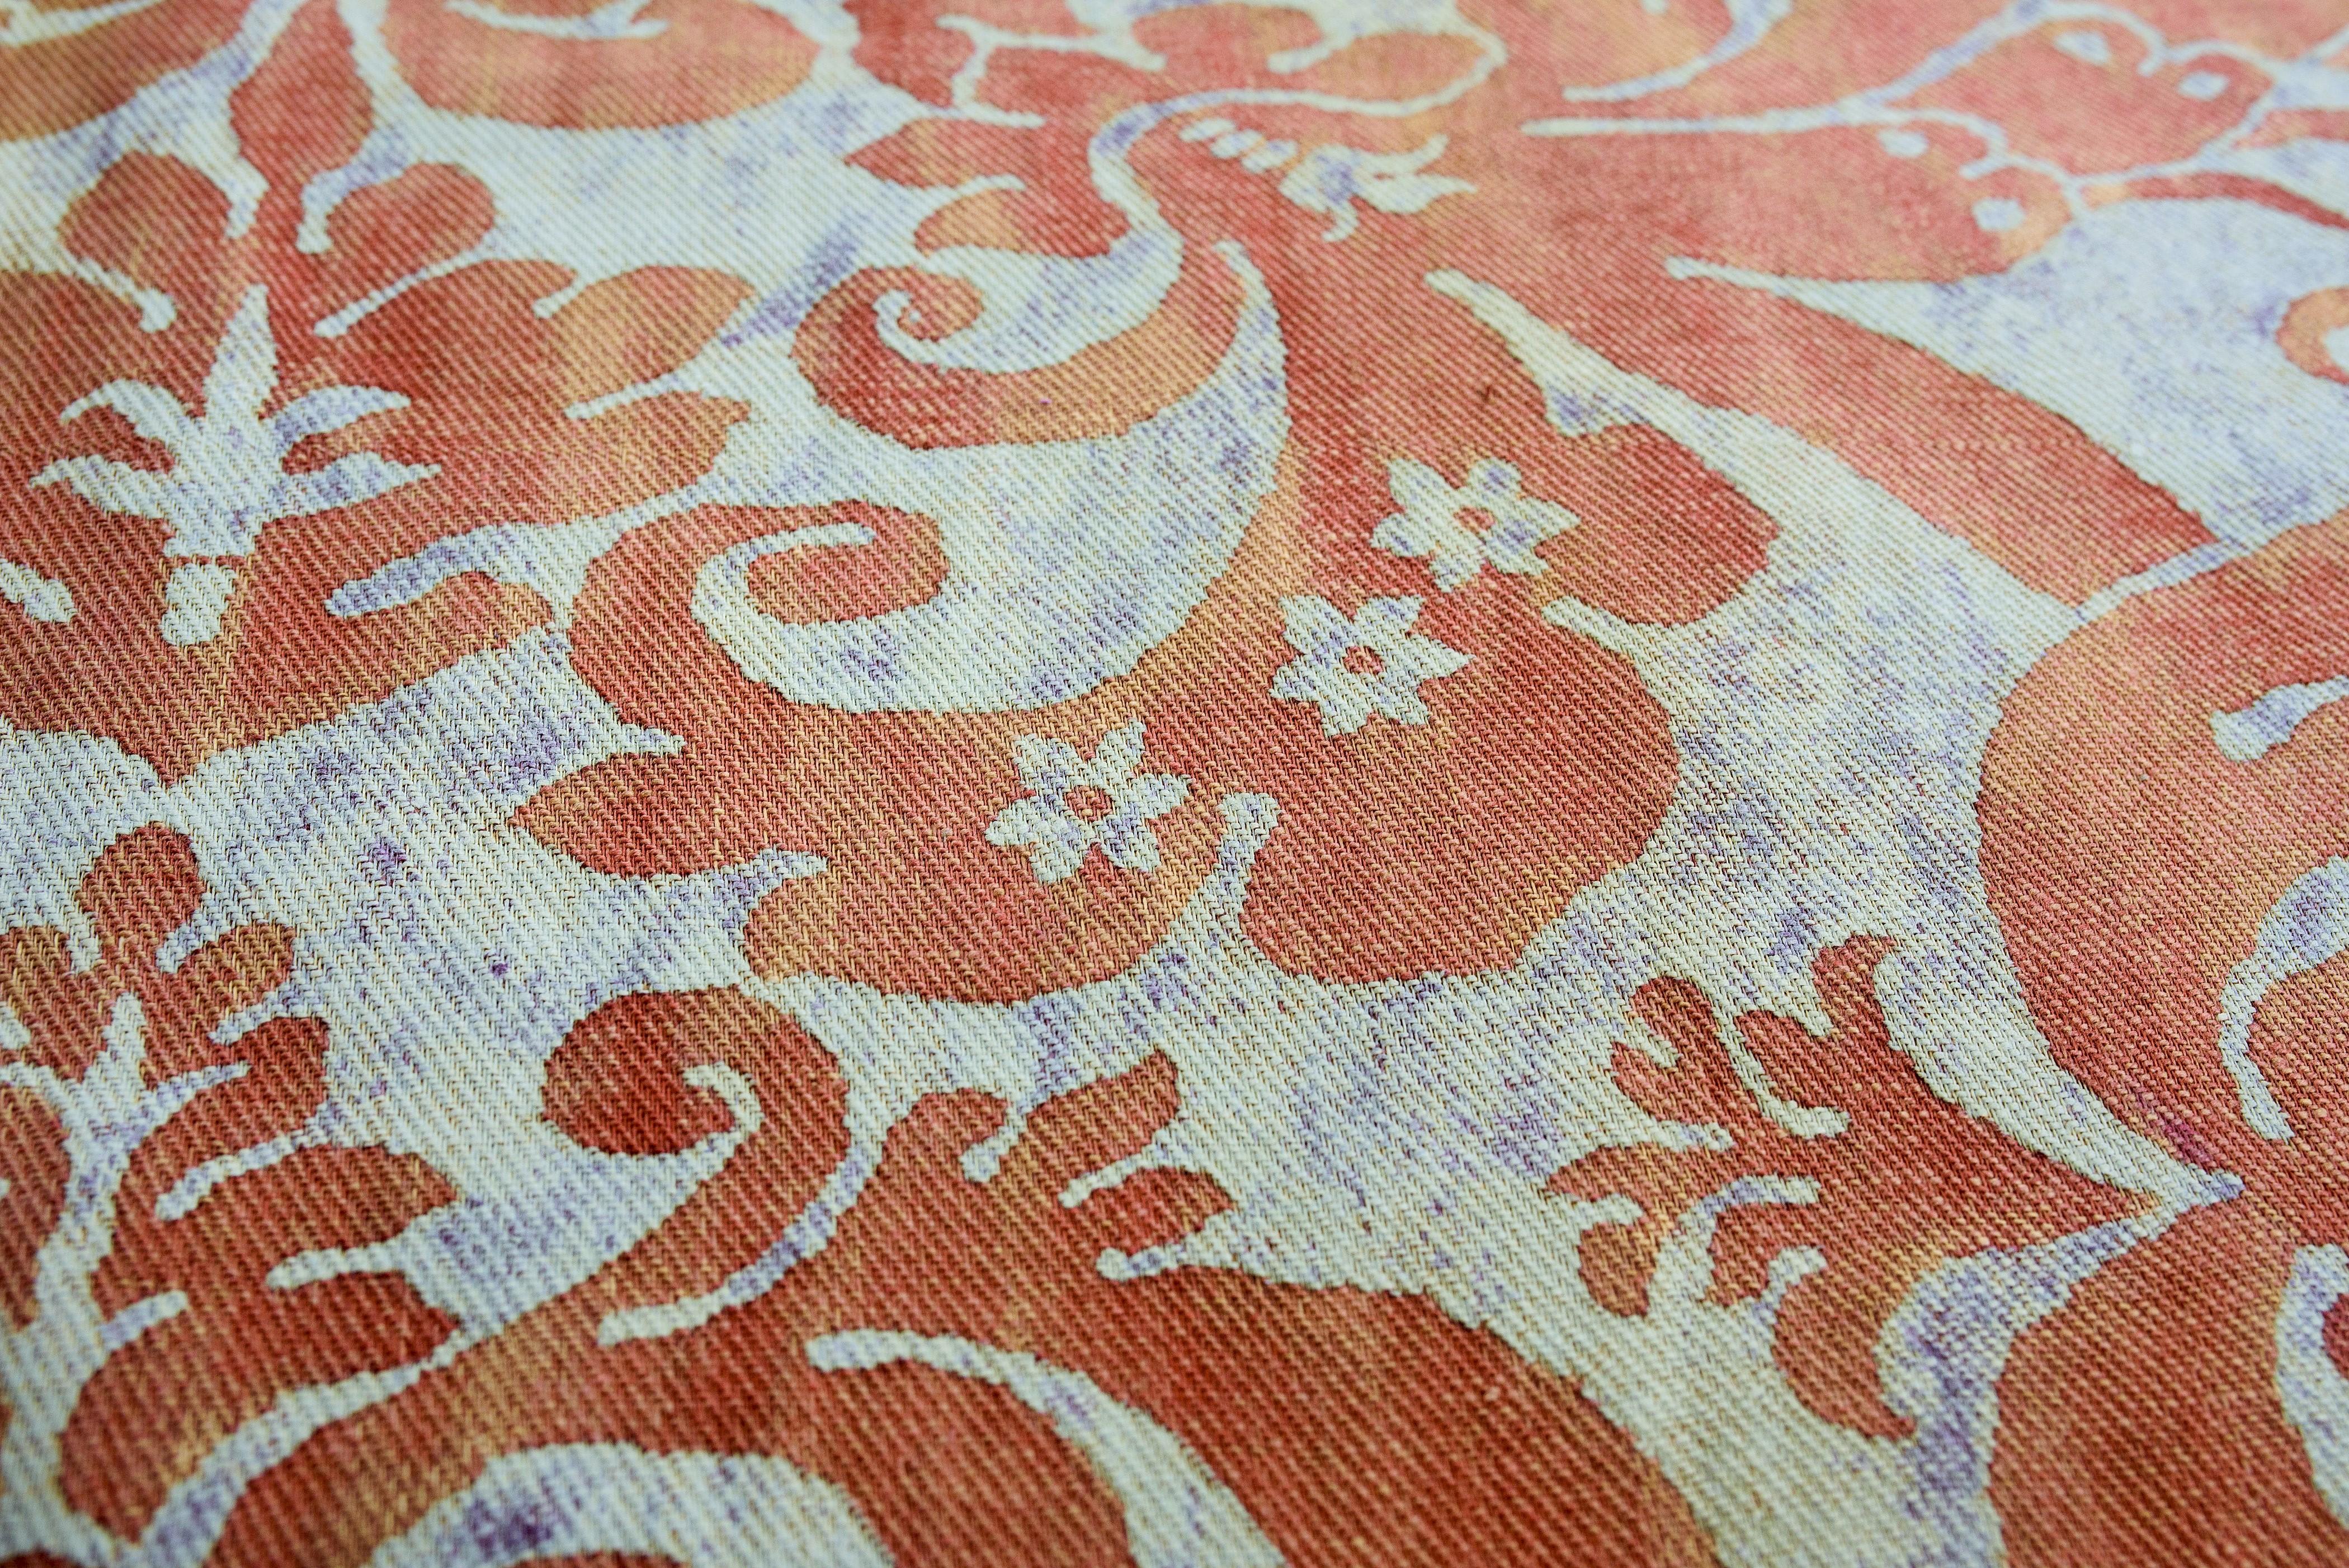 A Mariano Fortuny Printed Cotton Fabric - Italy Circa 1940 For Sale 6